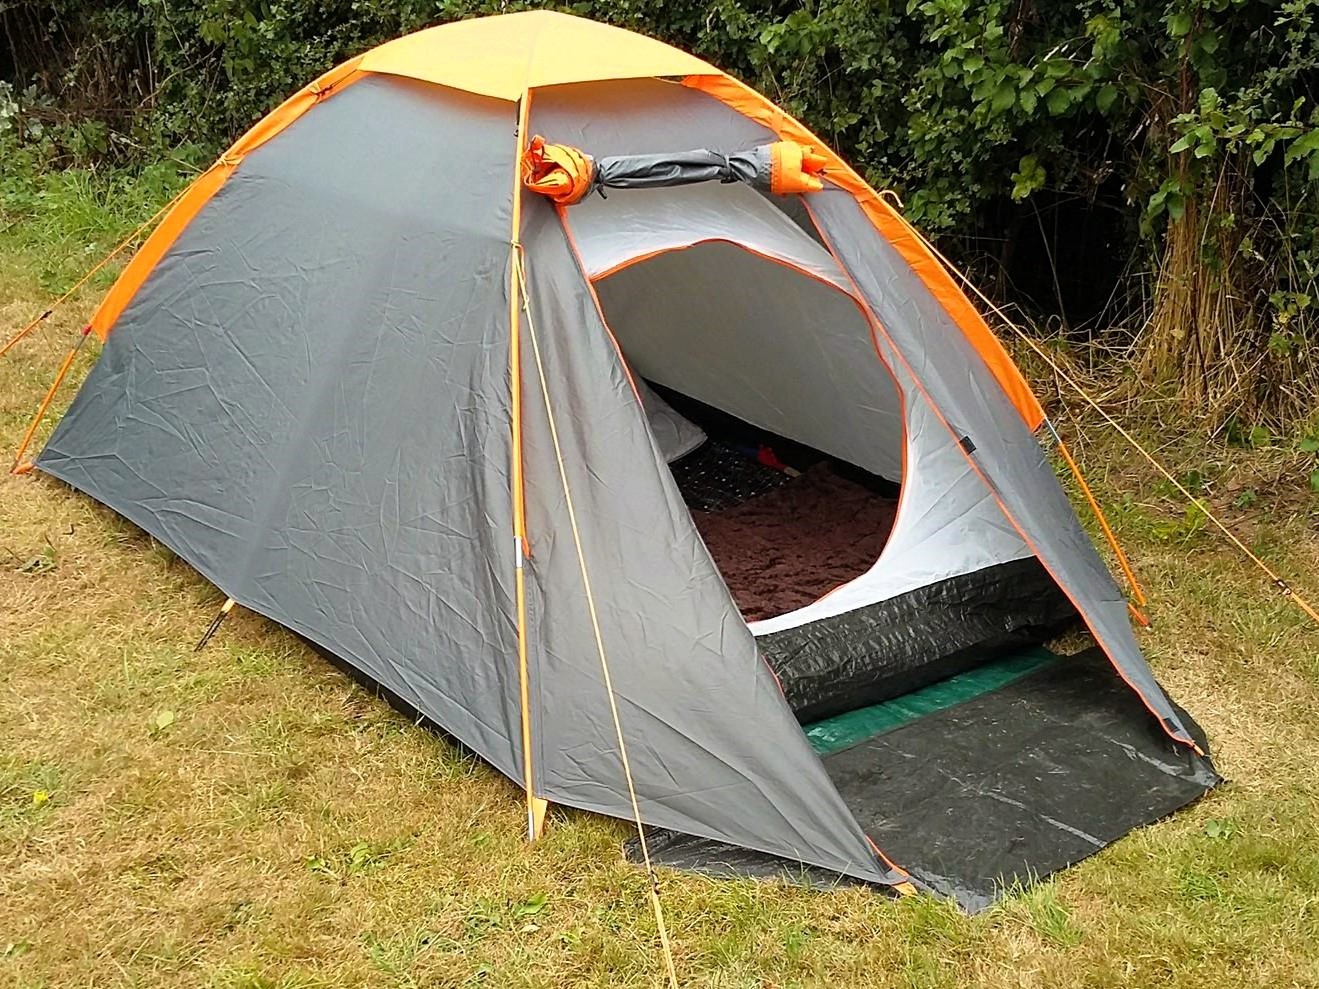 A small pitched tent